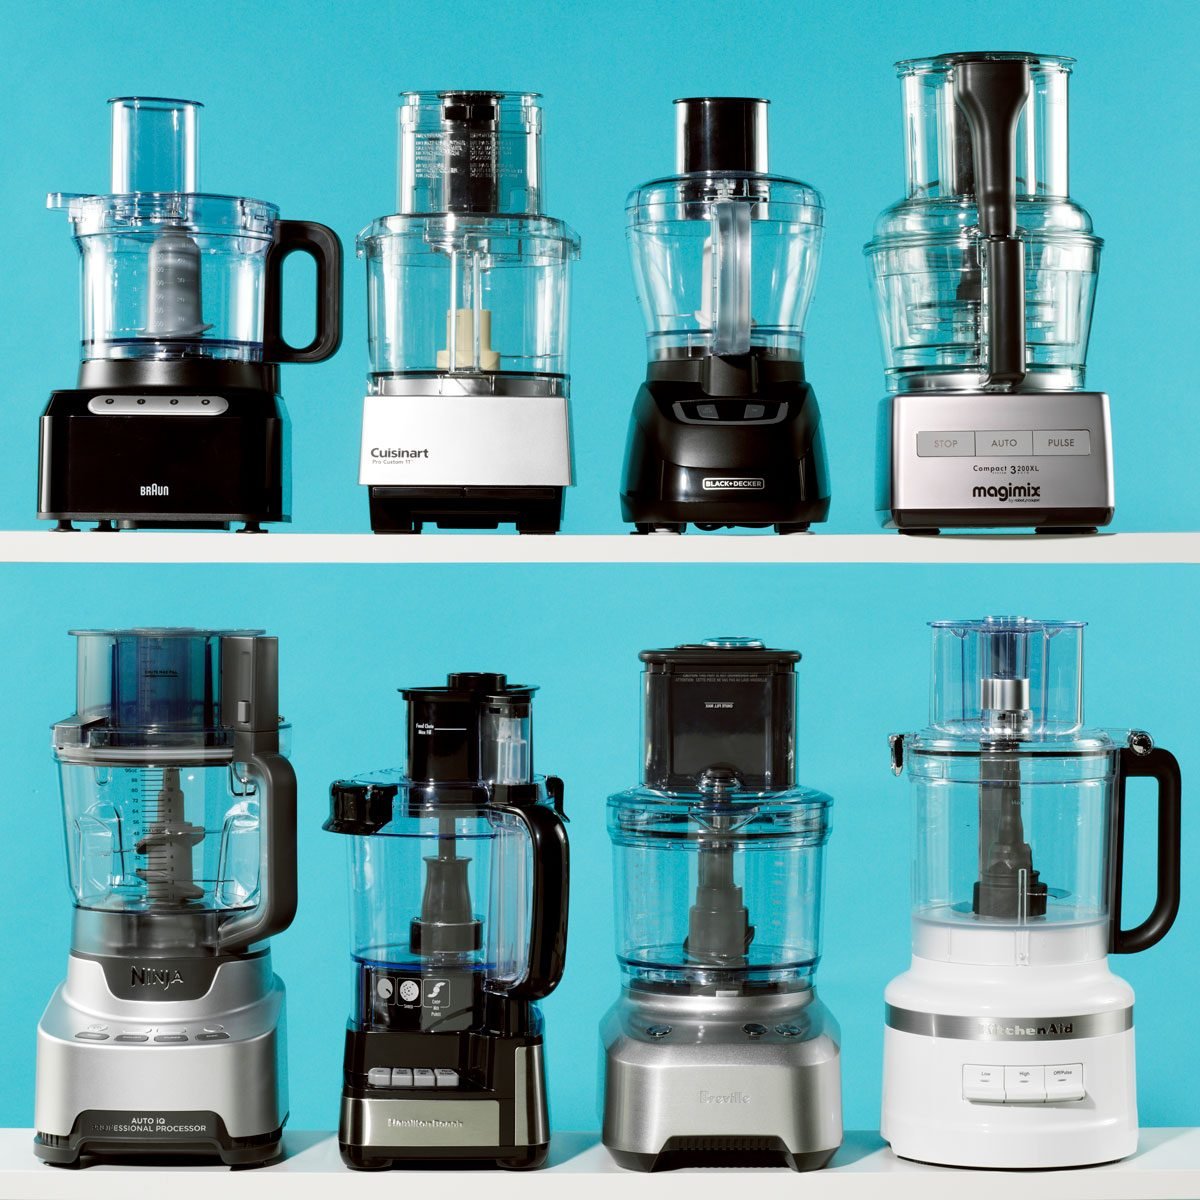 We Tested 8 Models To Find The Best Food Processor For Every Kitchen